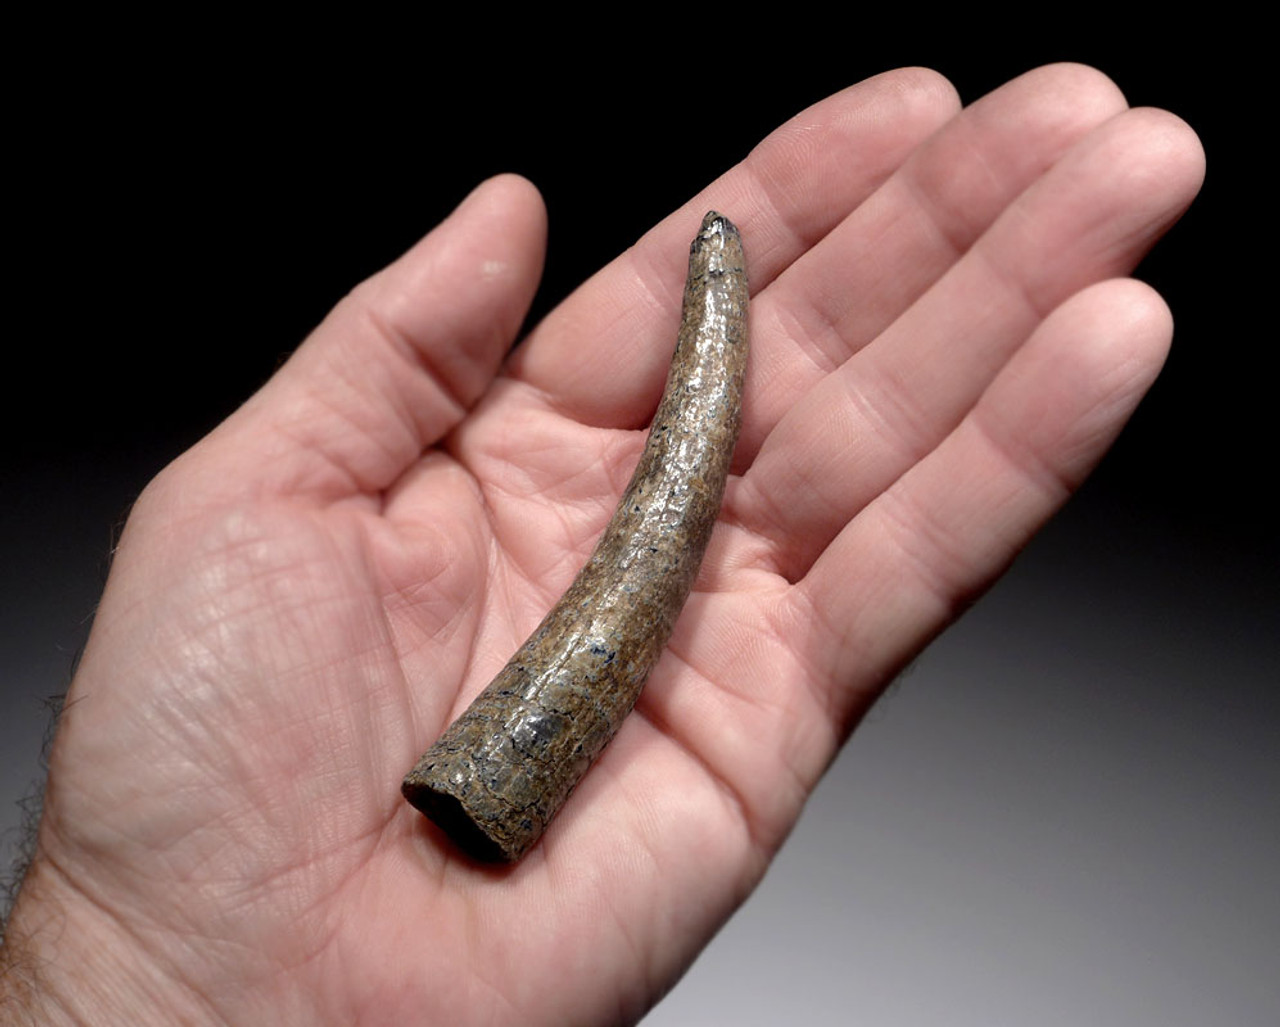 WH033 - RARE PREHISTORIC SPERM PHYSETER WHALE TOOTH OF EXCEPTIONAL SIZE PRESERVATION